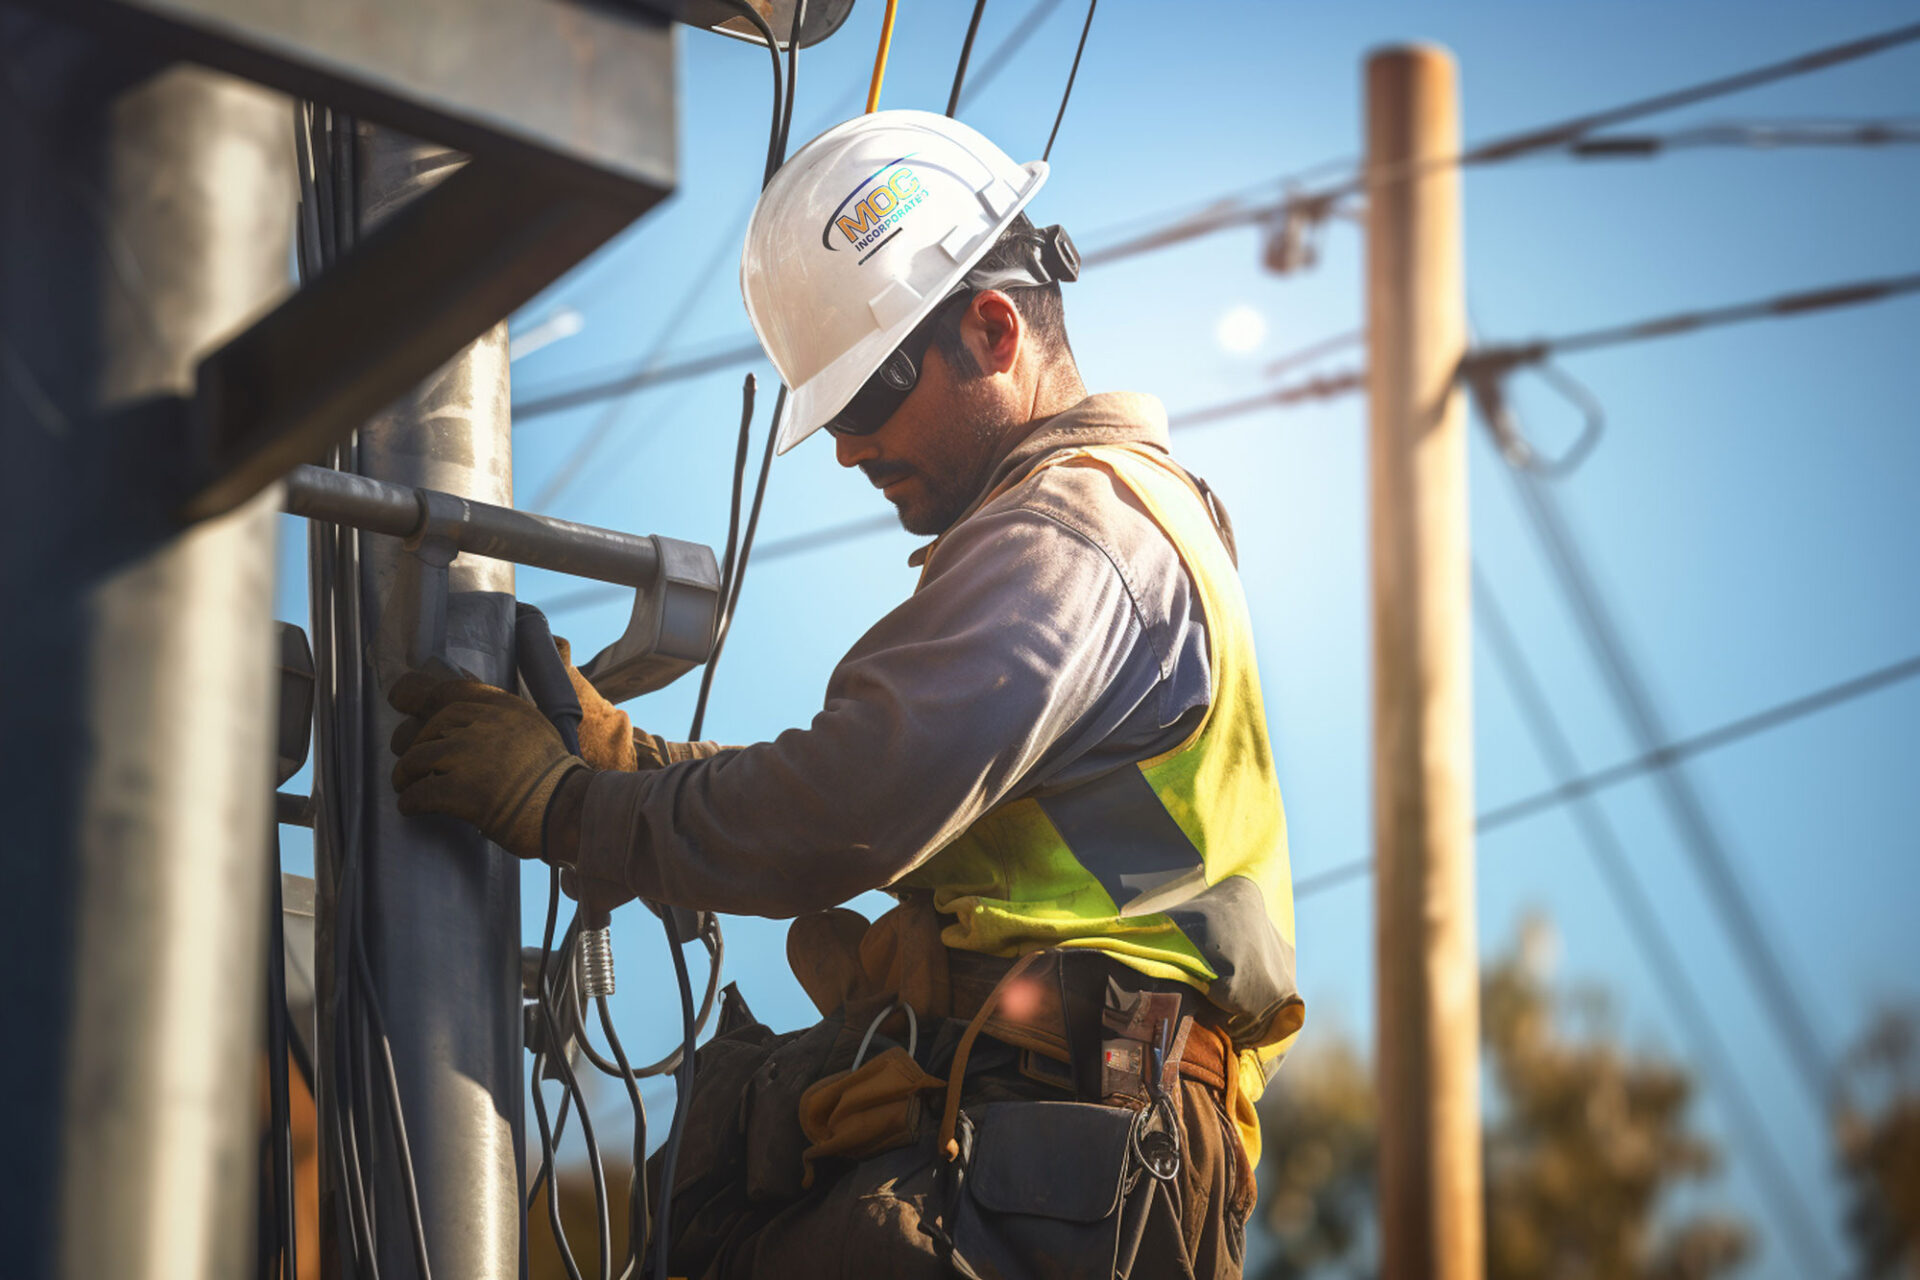 A skilled worker in safety gear is adjusting components on a metal structure, with power lines and utility poles in the background, representing the hands-on expertise in the electrical construction industry.